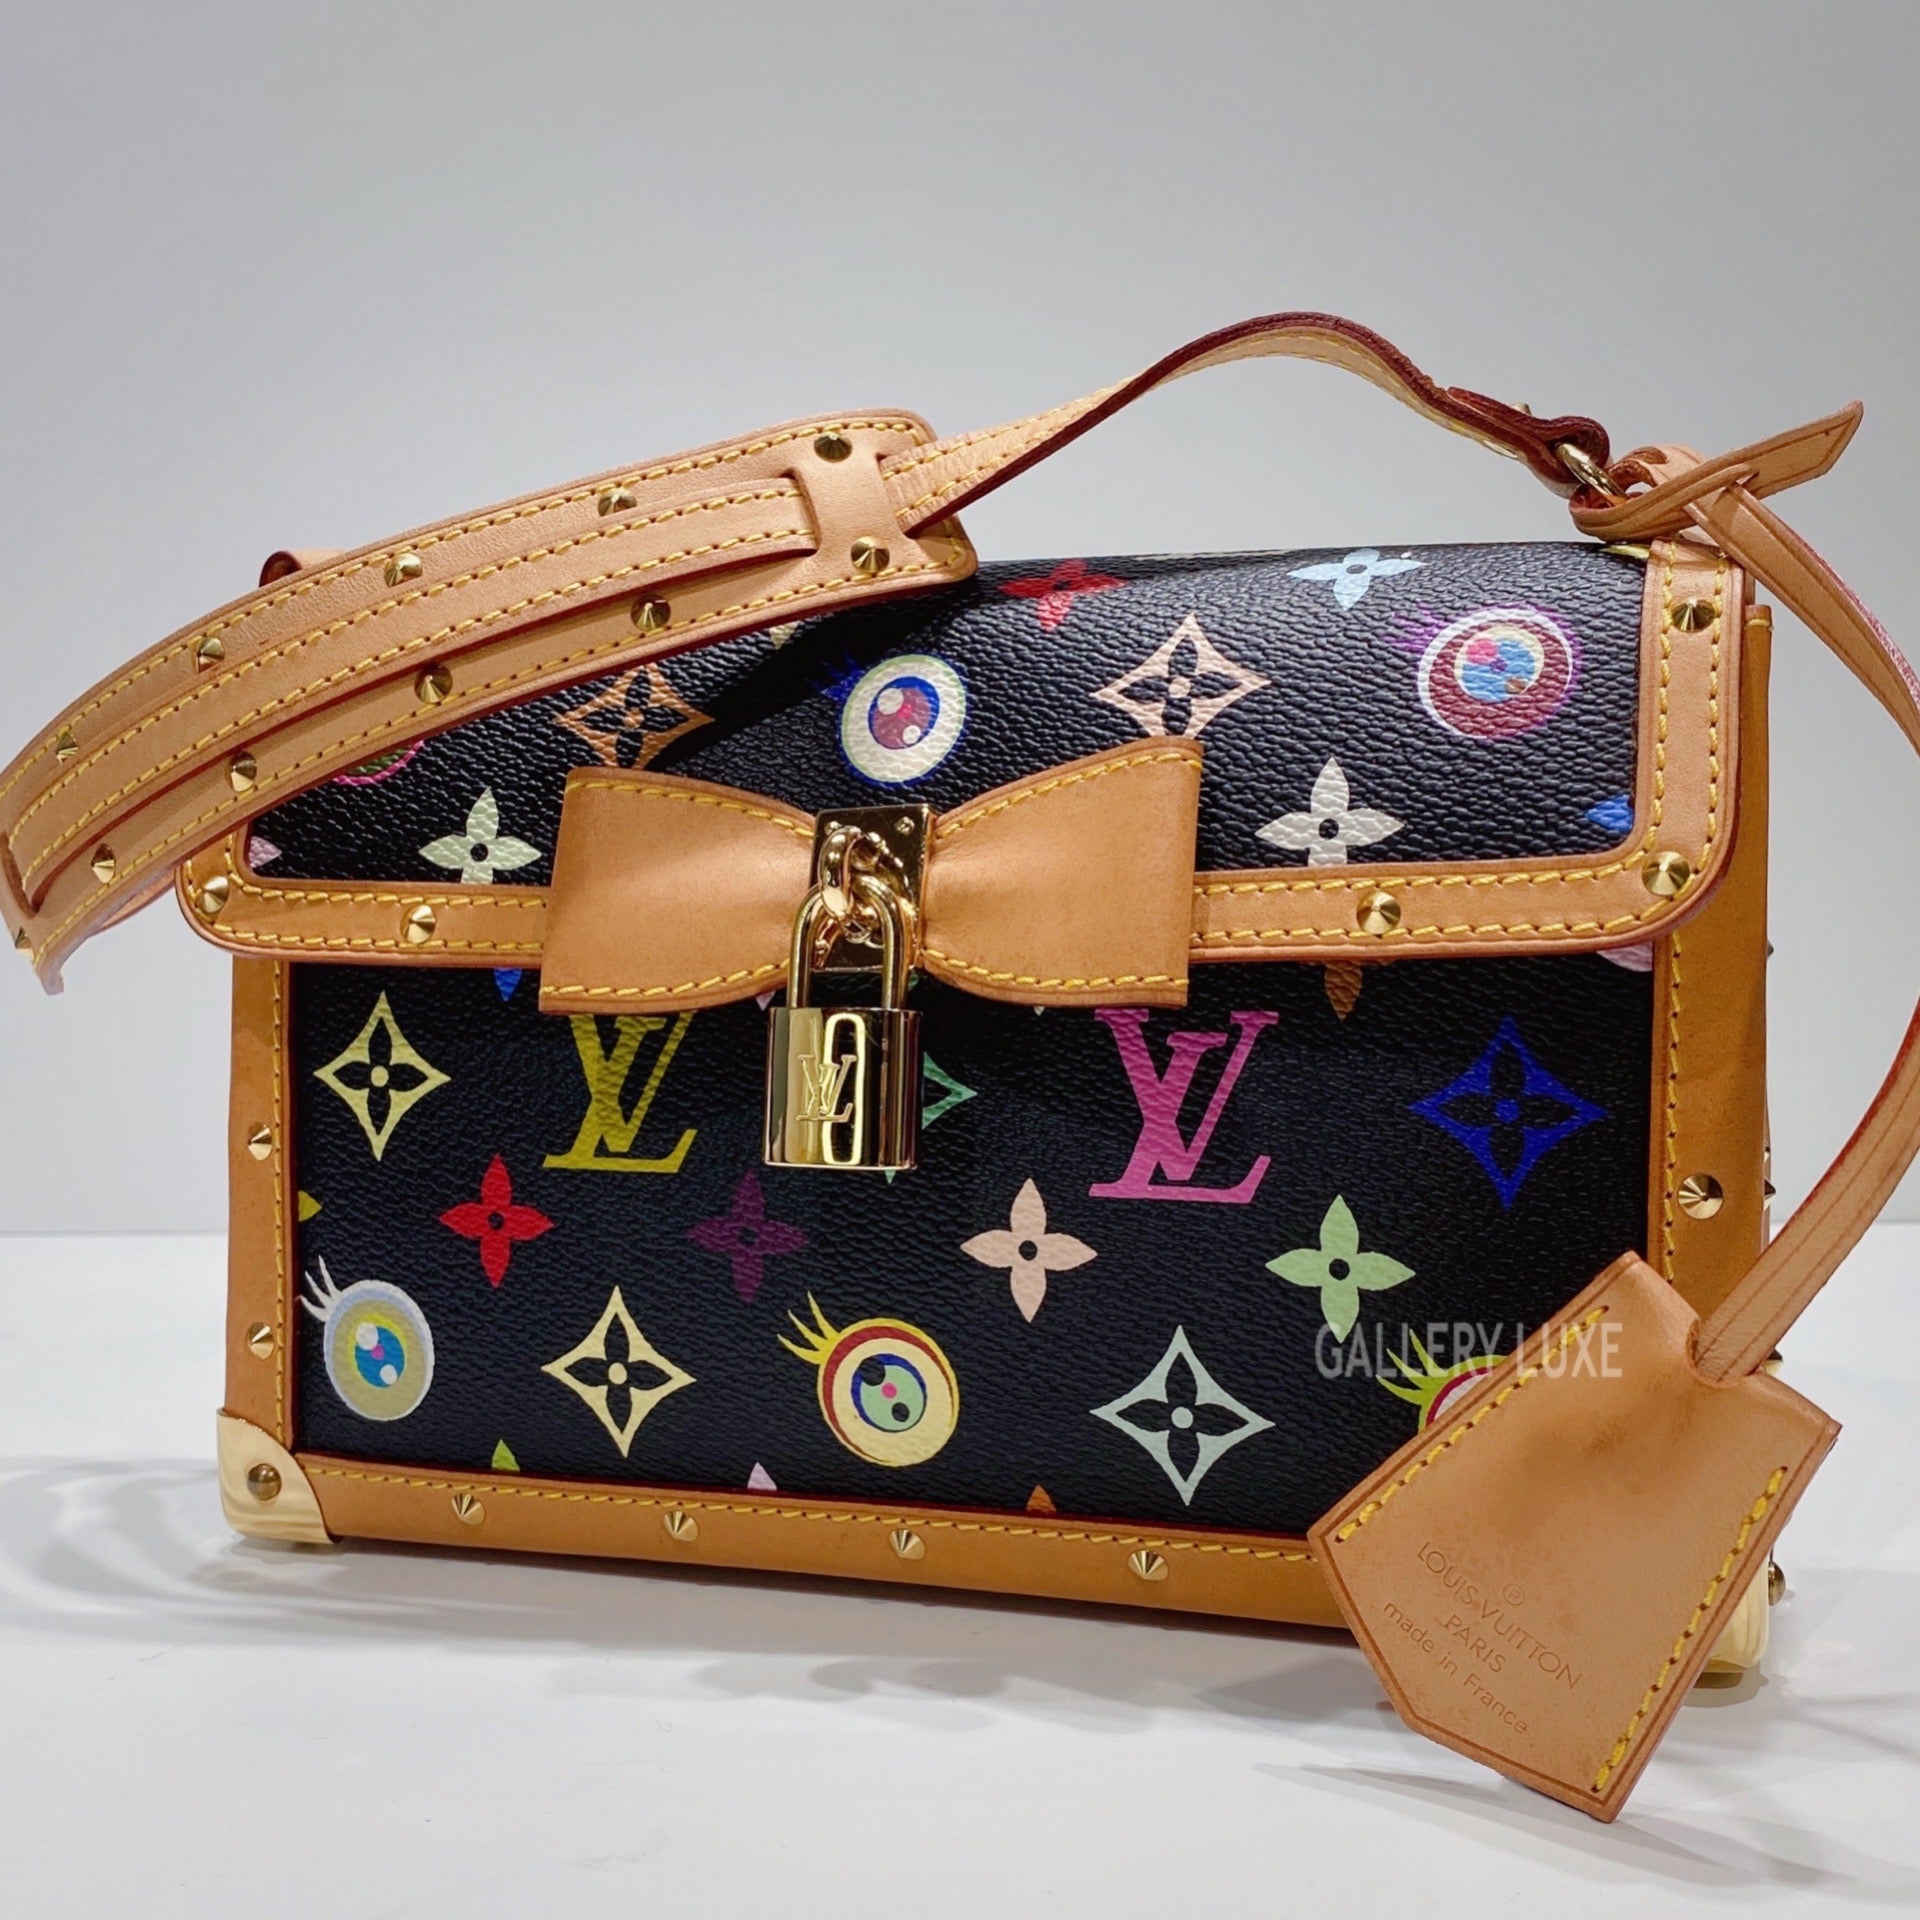 Louis Vuitton Classic - The Eye of the Needle